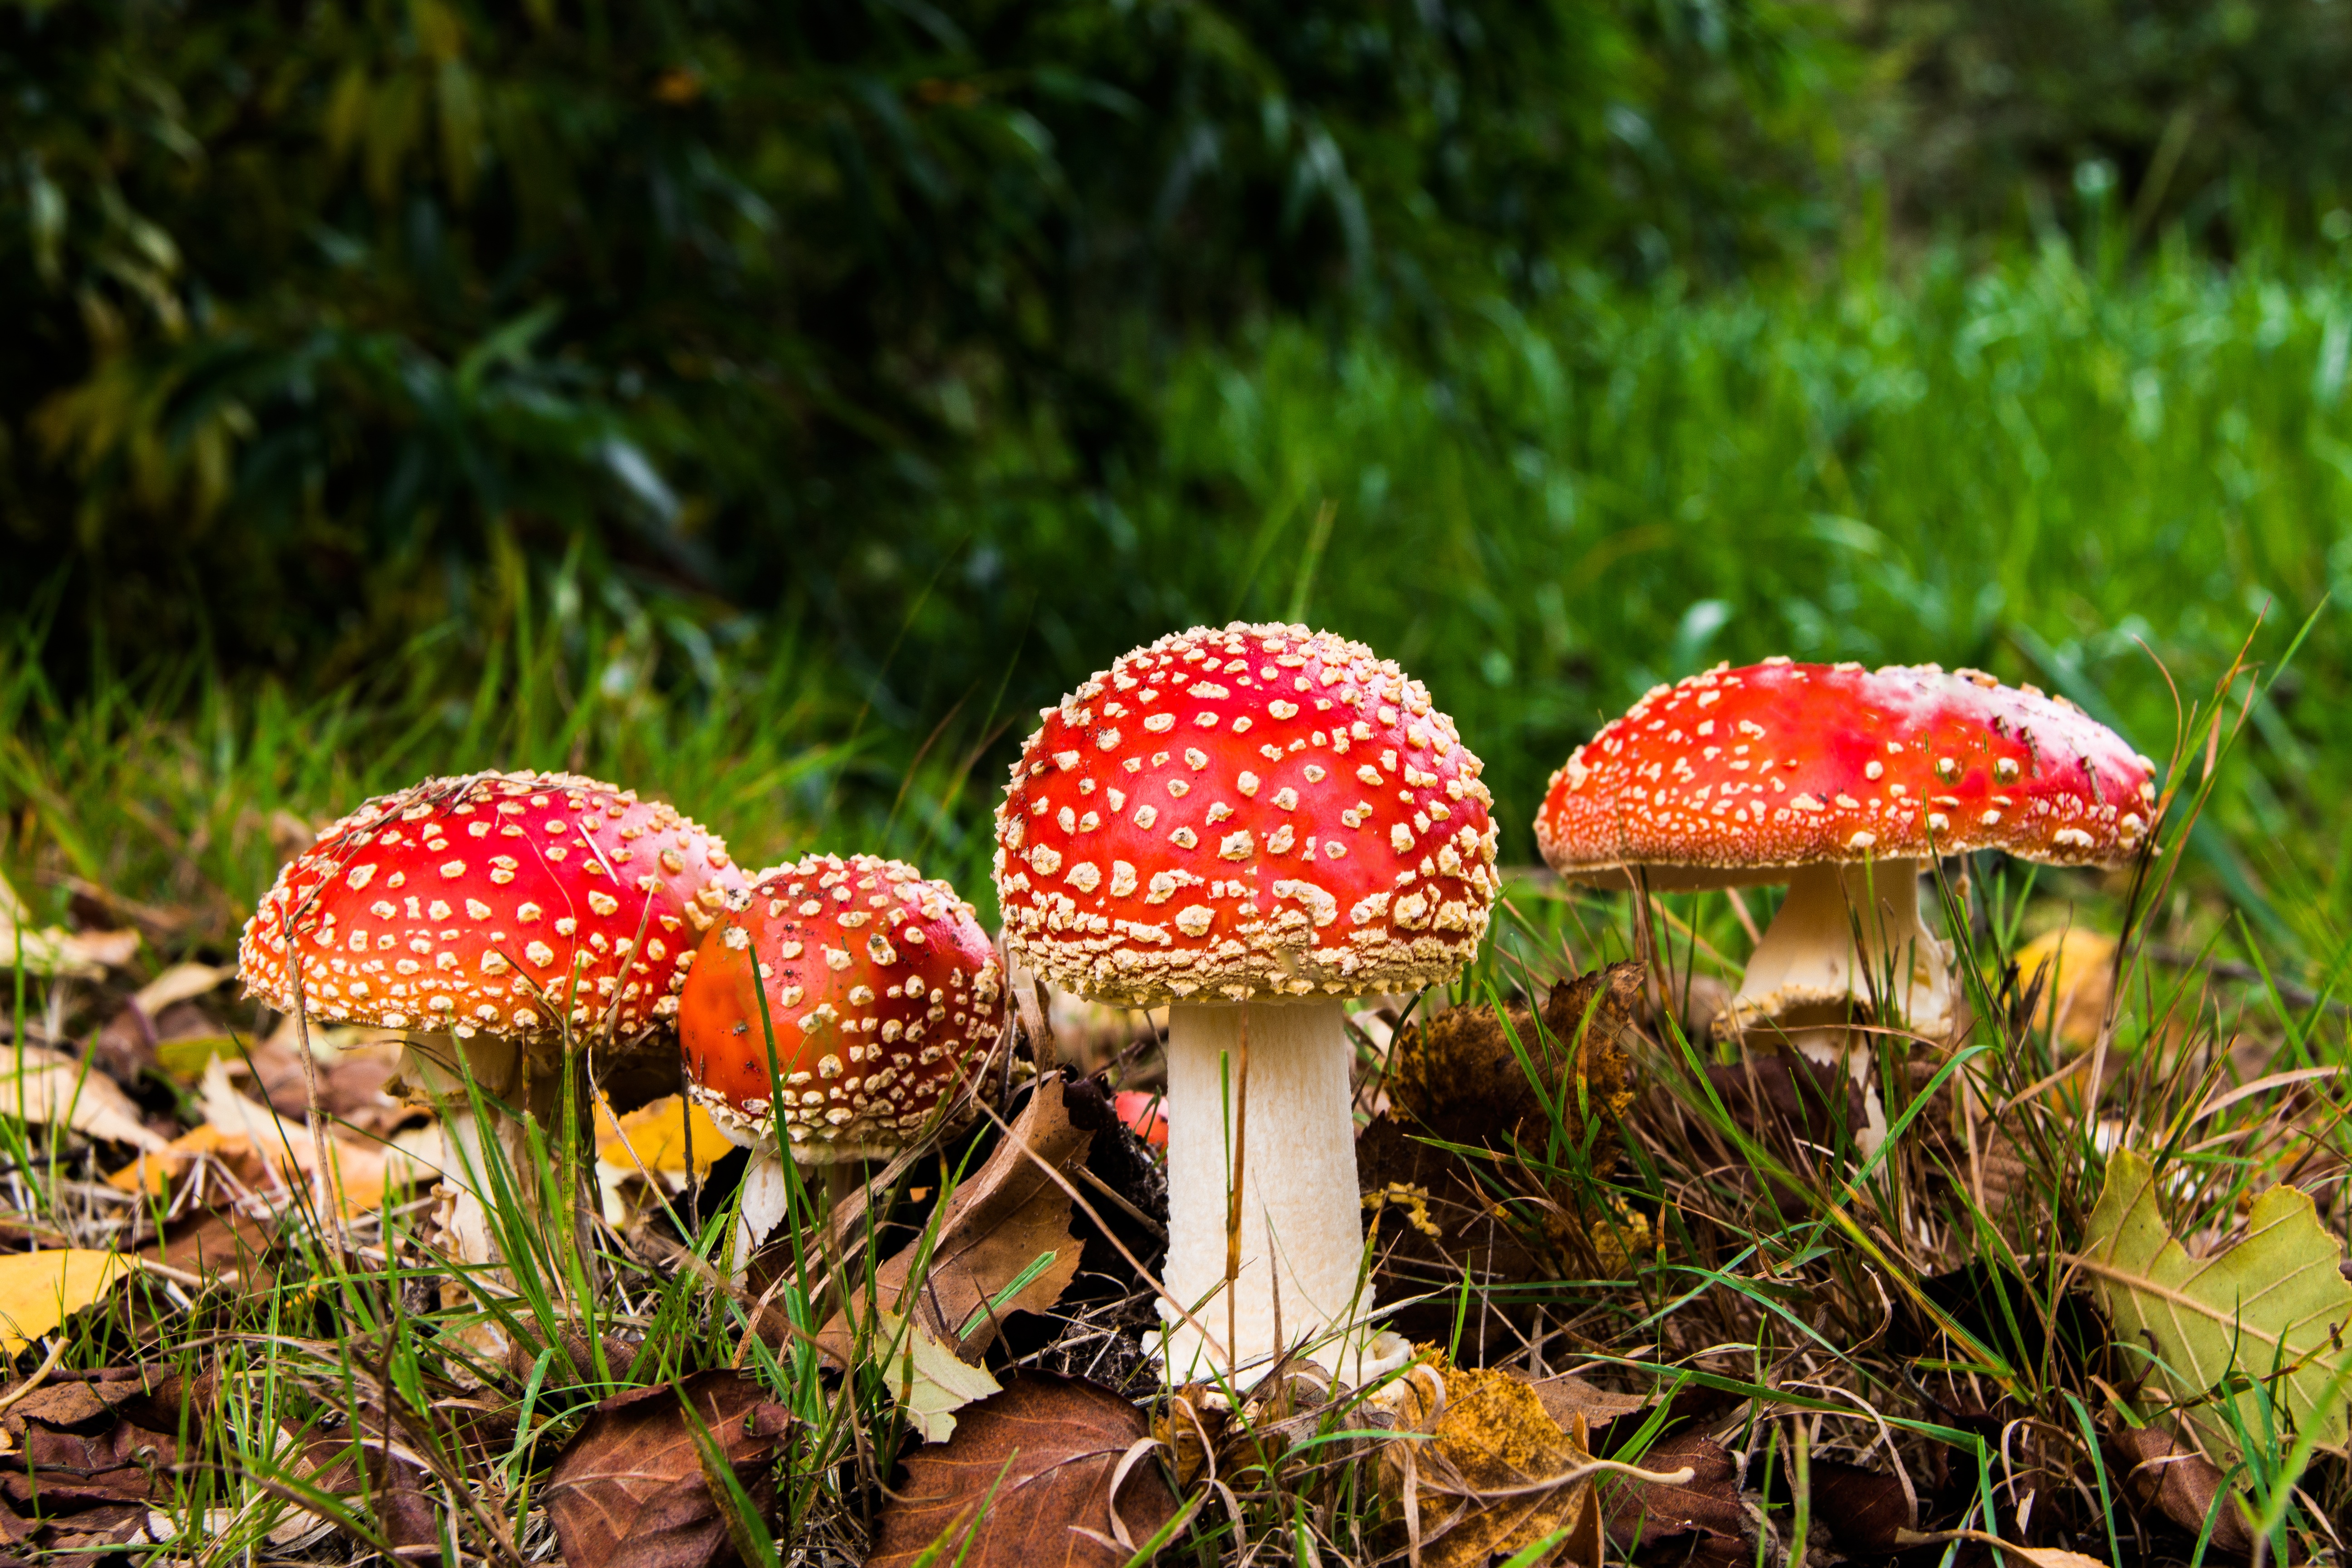 A family of fly agaric